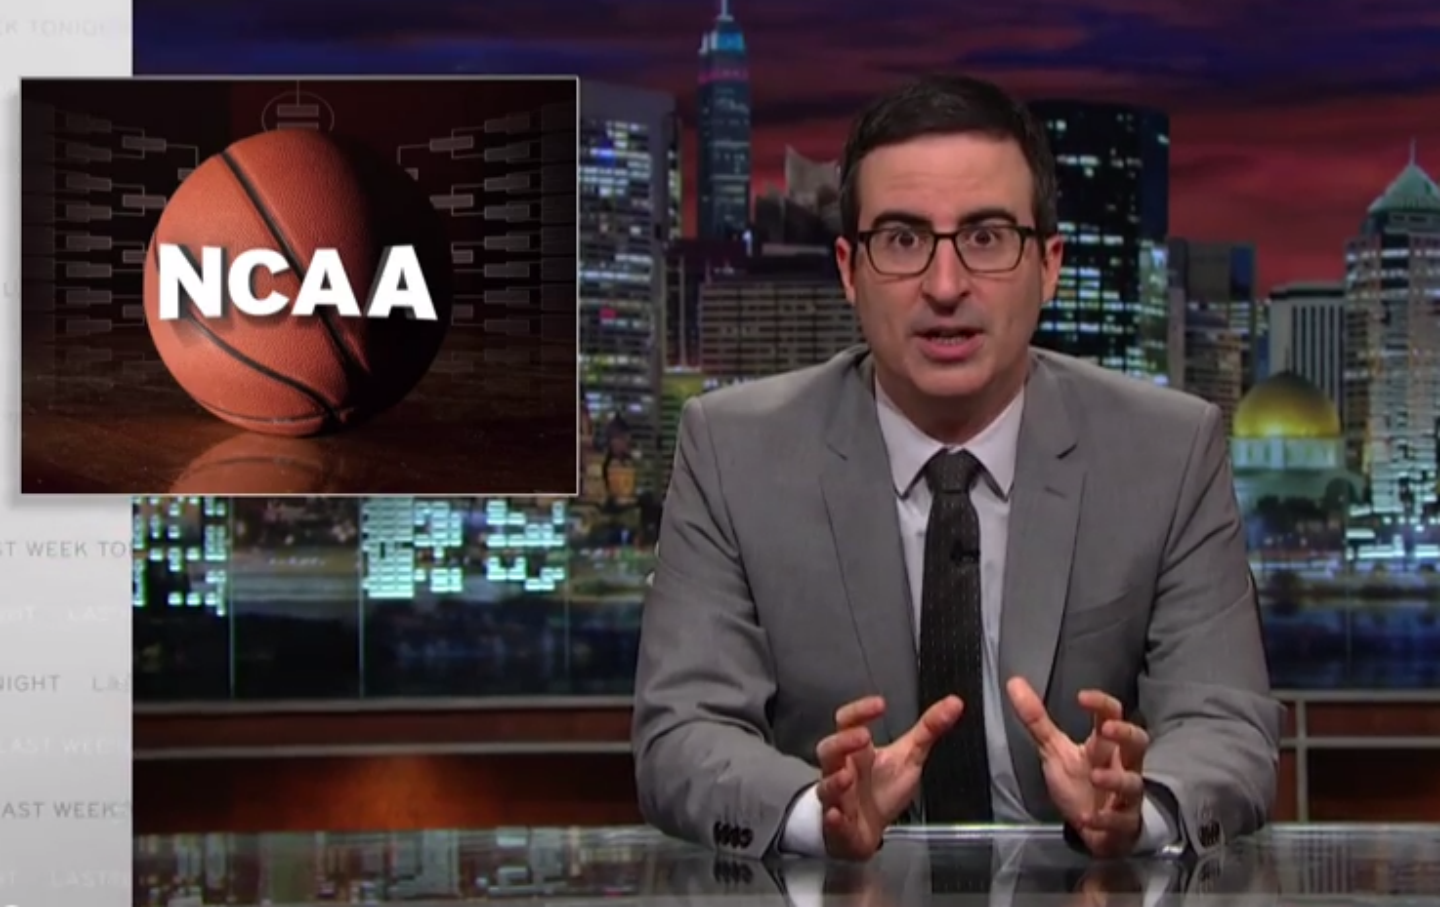 Why Not Even the Mighty John Oliver Can Shame the NCAA